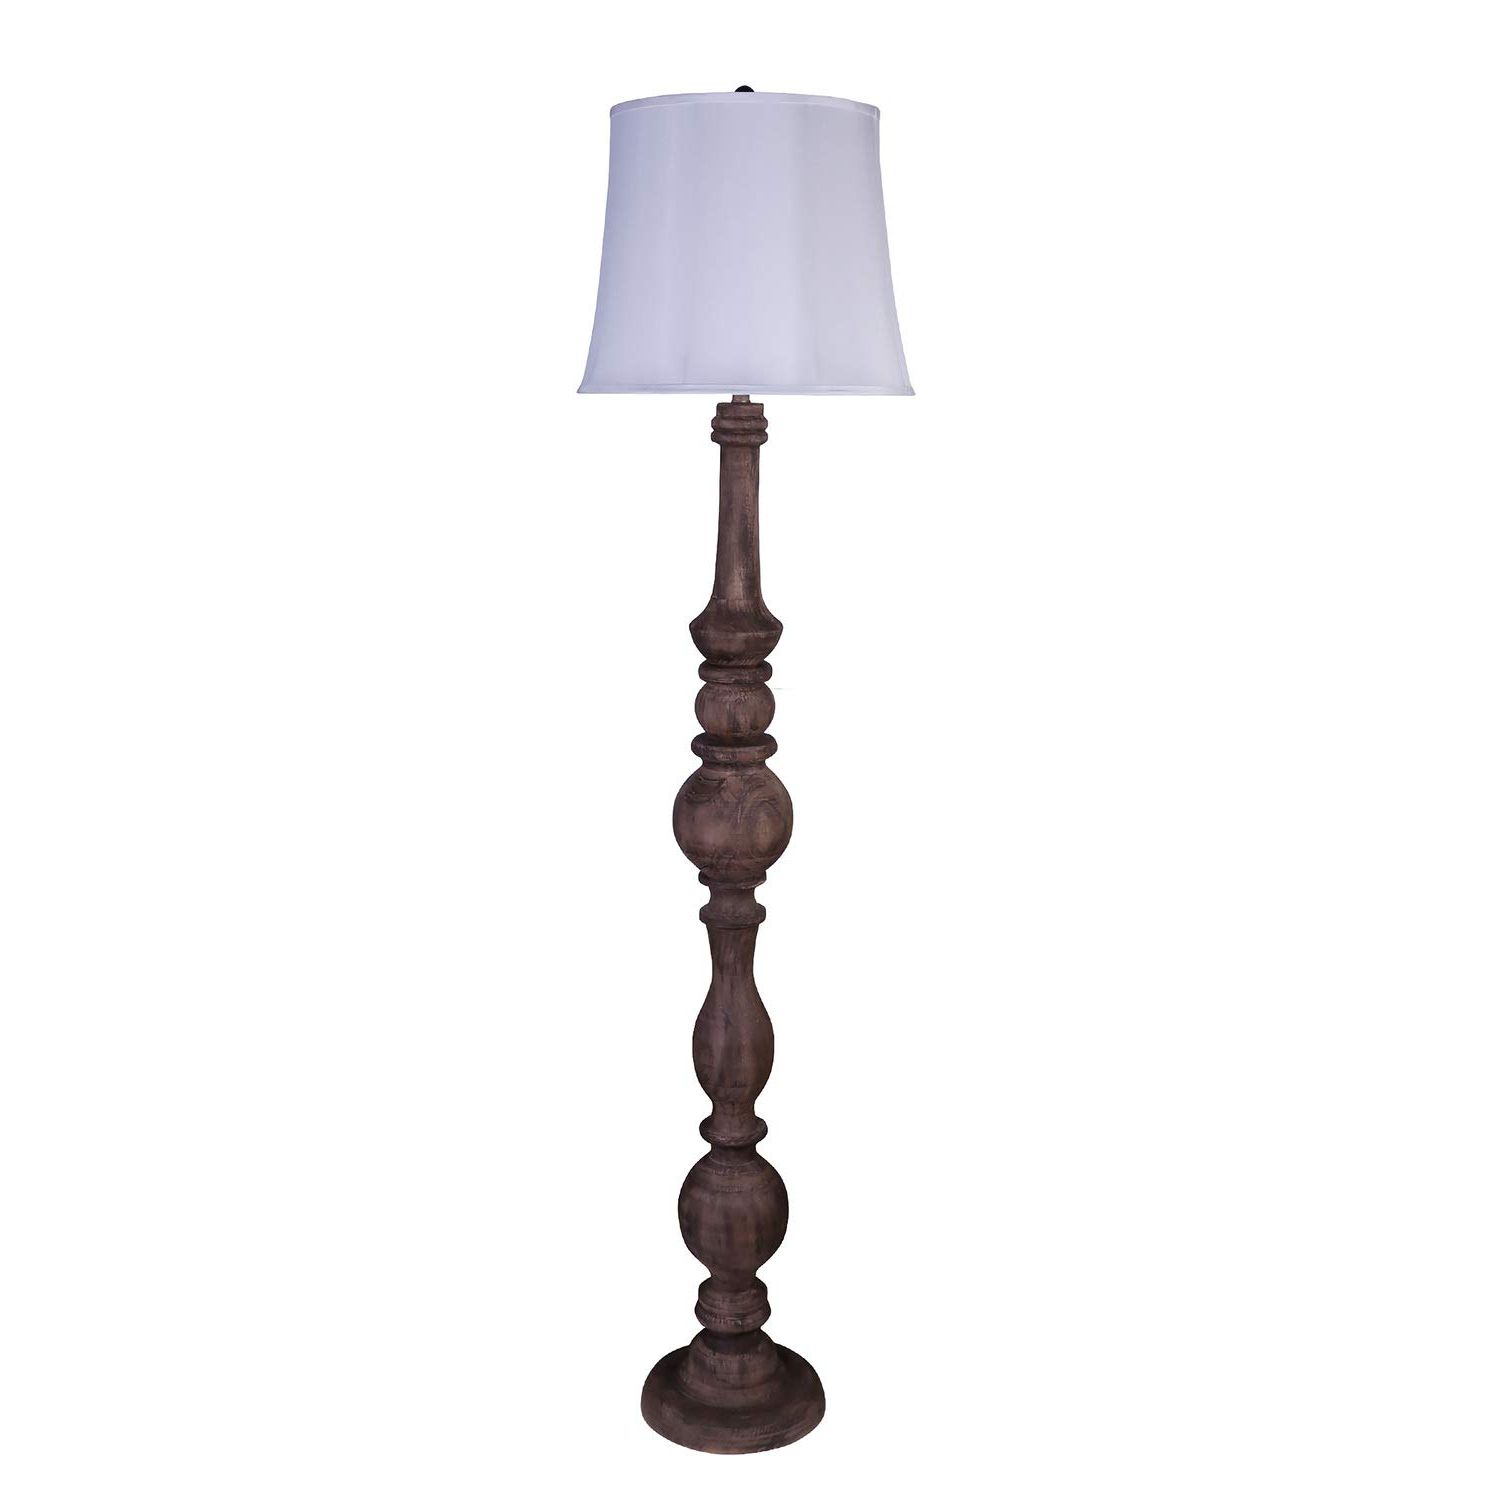 2019 Carved Pattern Standing Lamps Regarding Tx Usa Corporation Brody Wood Carved Floor Lamp – Natural (View 10 of 15)